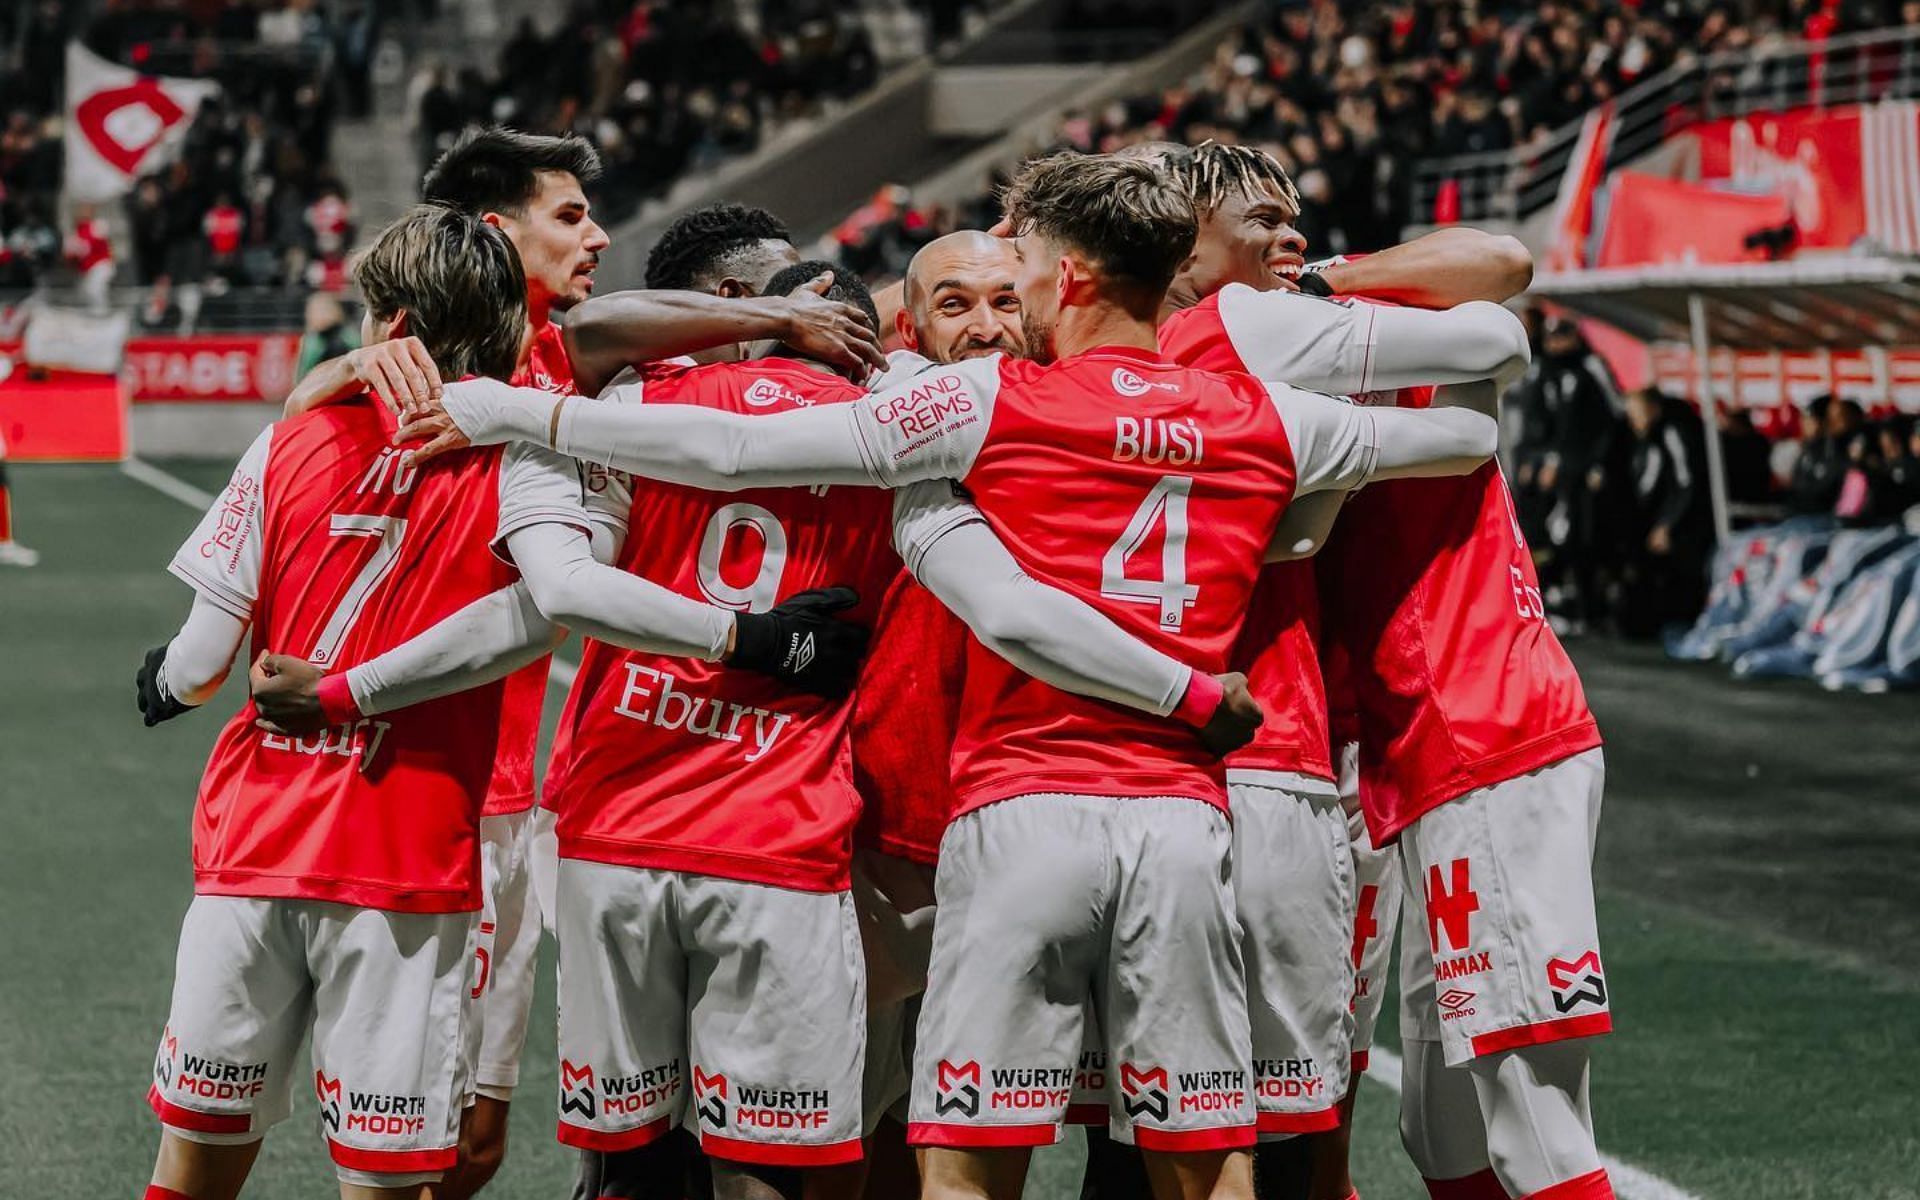 Can Reims continue their push for European qualification this weekend?